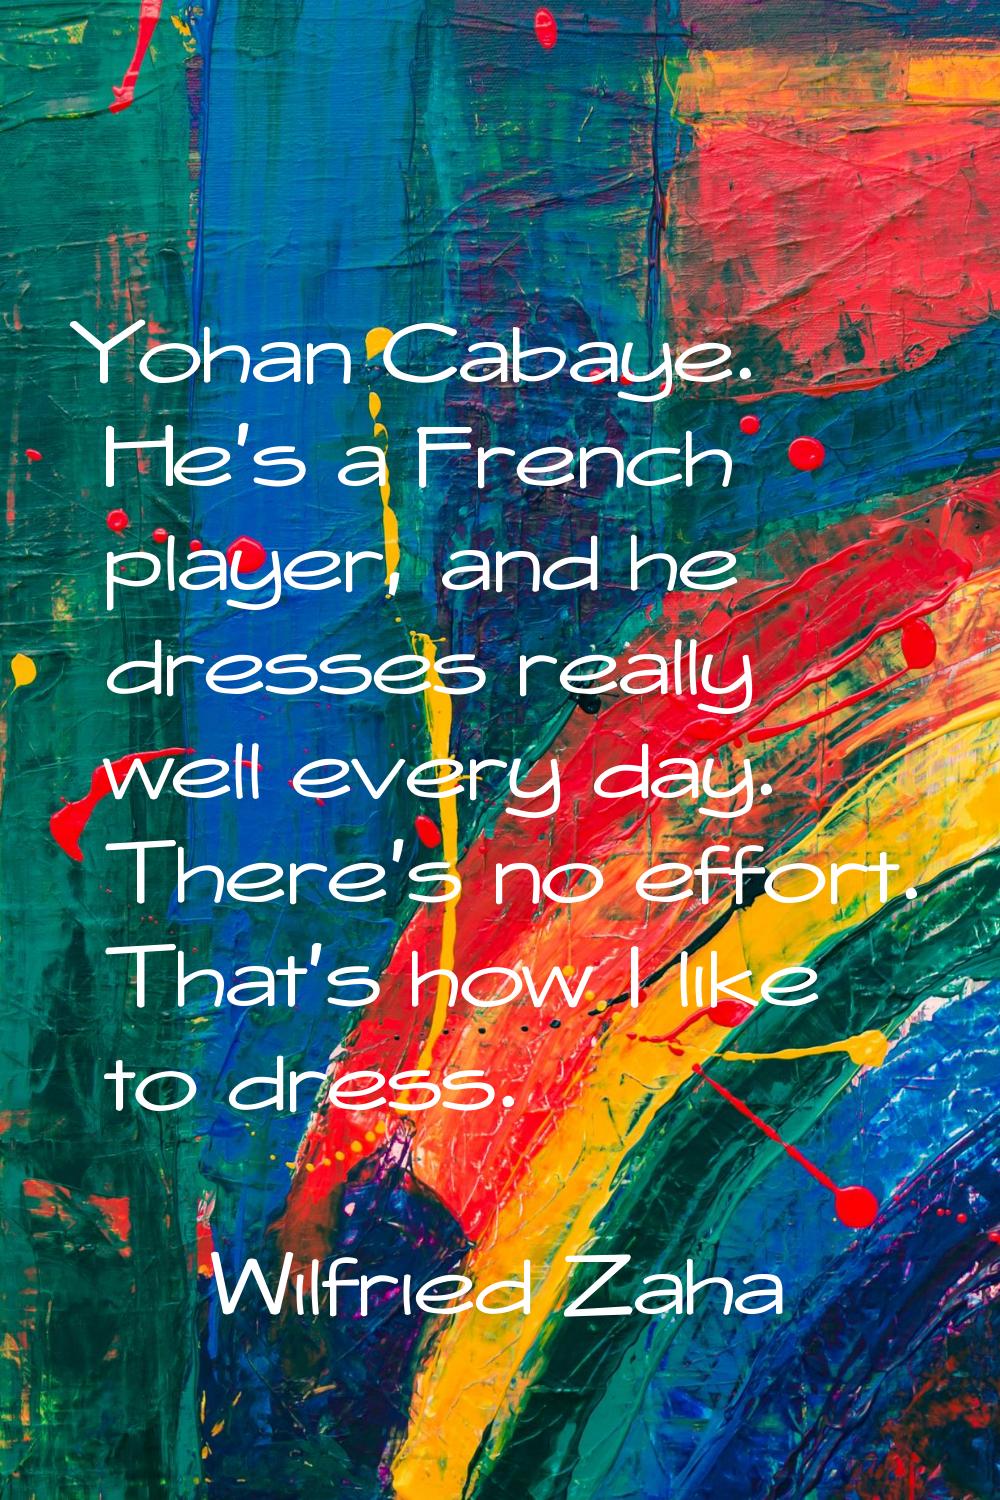 Yohan Cabaye. He's a French player, and he dresses really well every day. There's no effort. That's